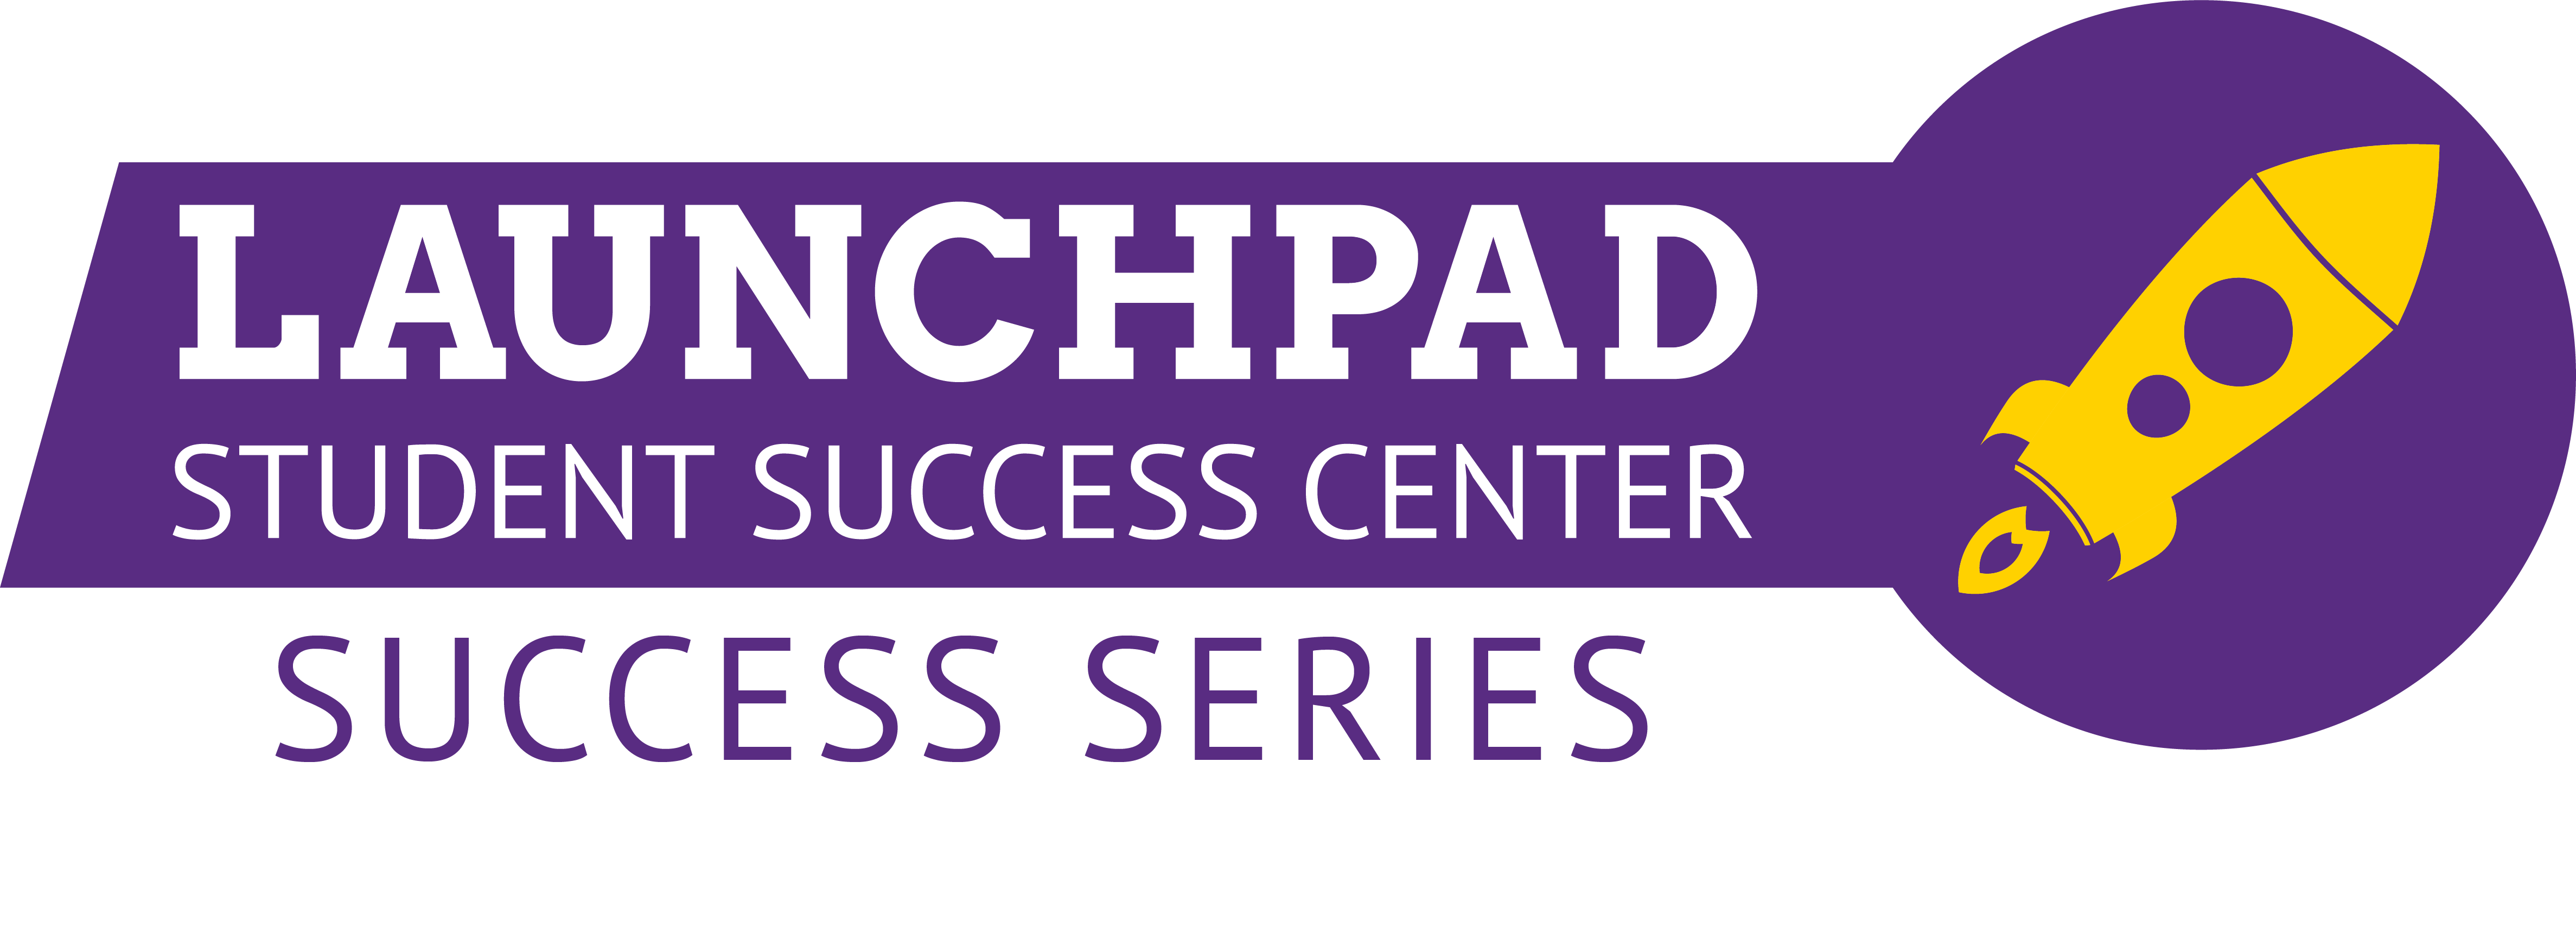 Image of the Launchpad Student Success Center success series logo with rocket.